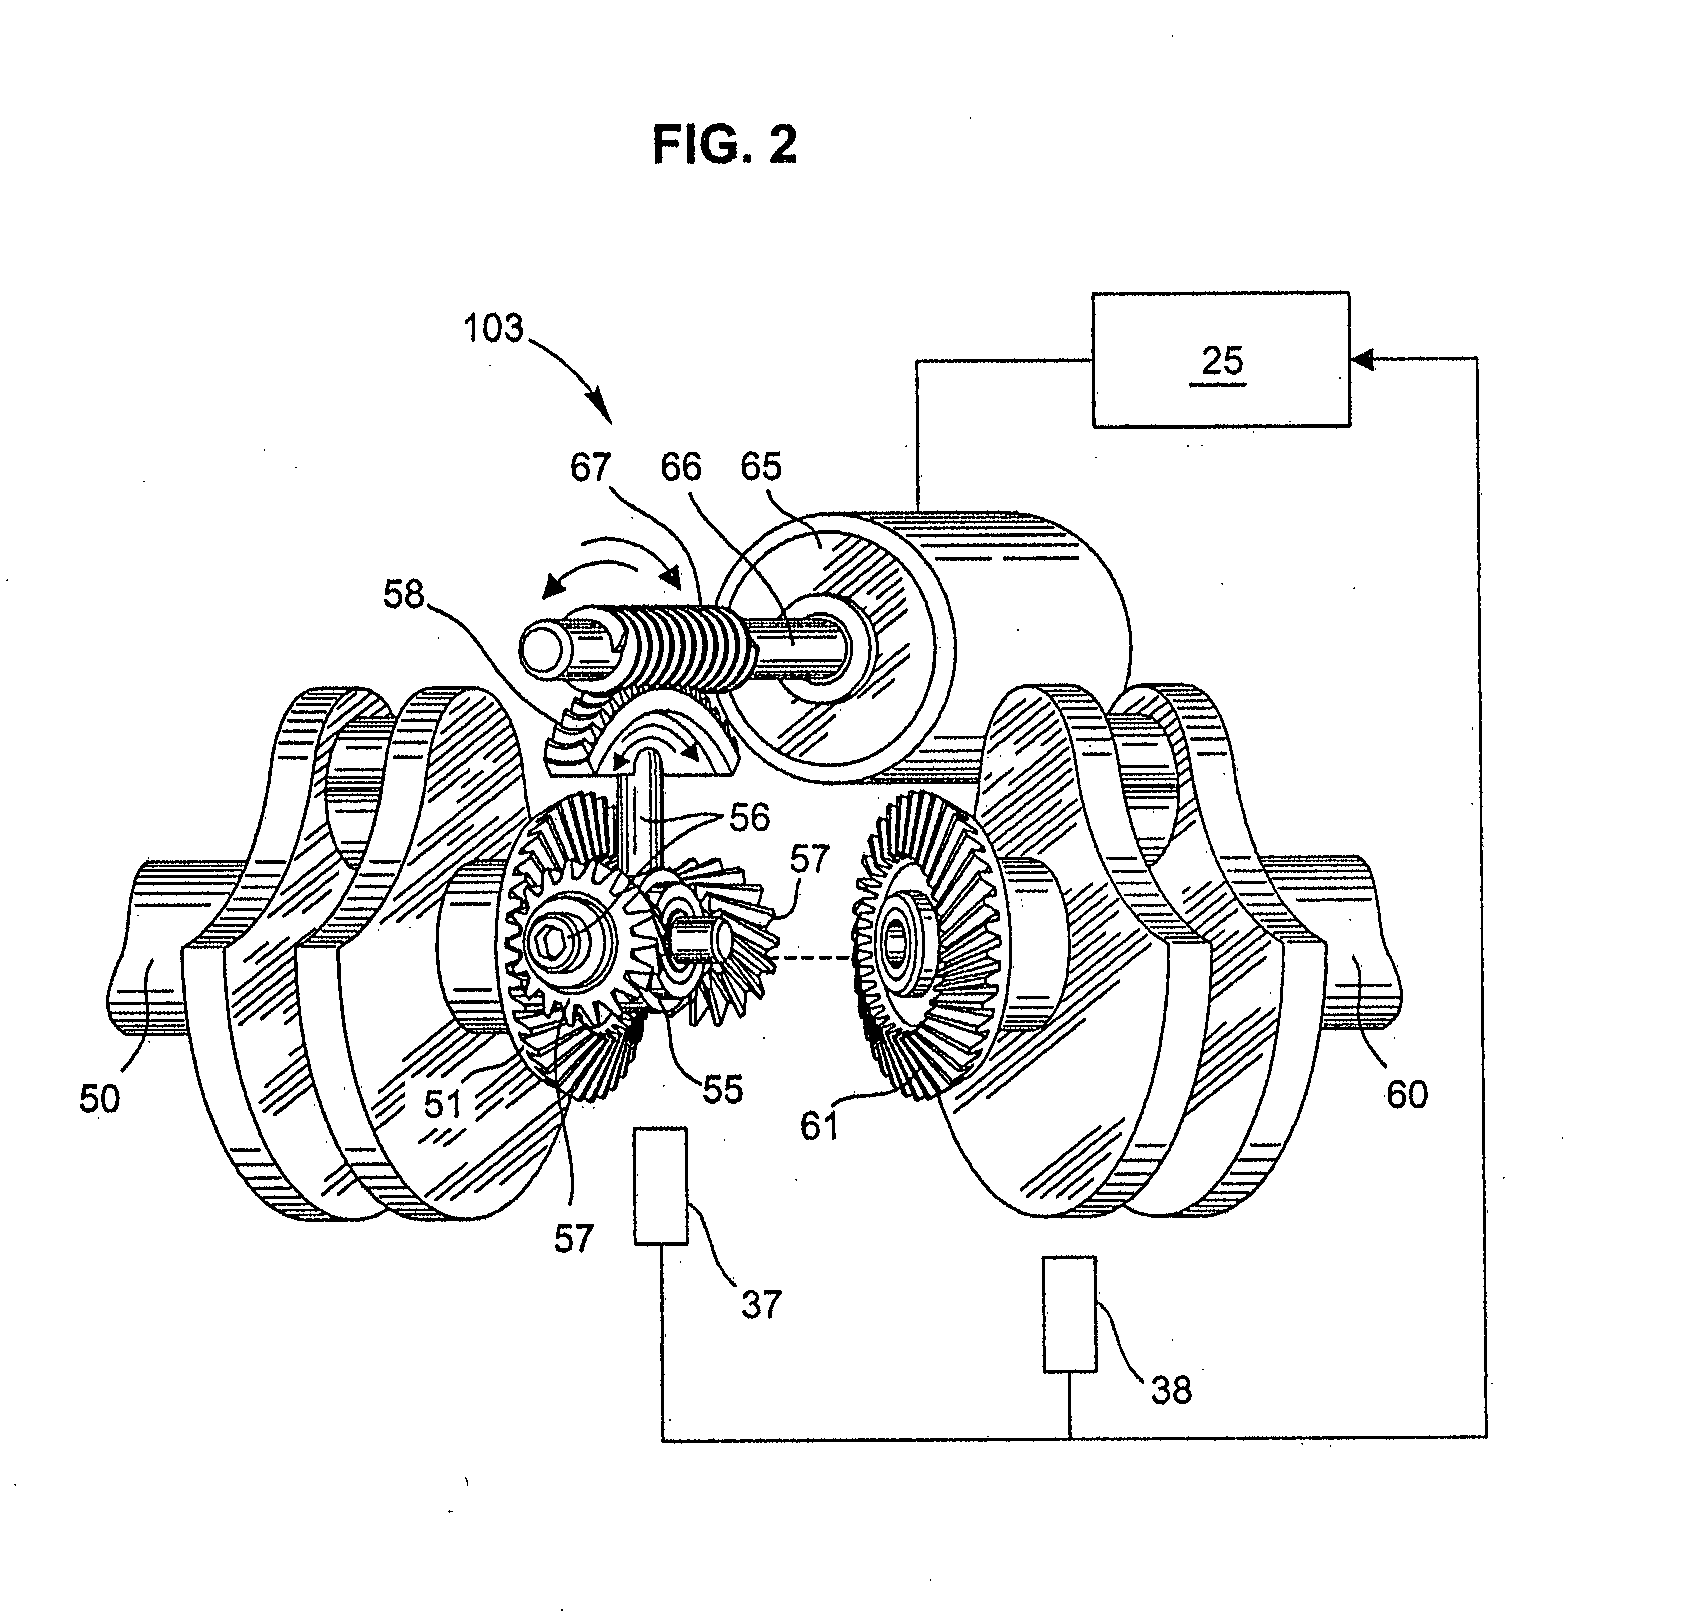 Split Cycle Phase Variable Reciprocating Piston Spark Ignition Engine